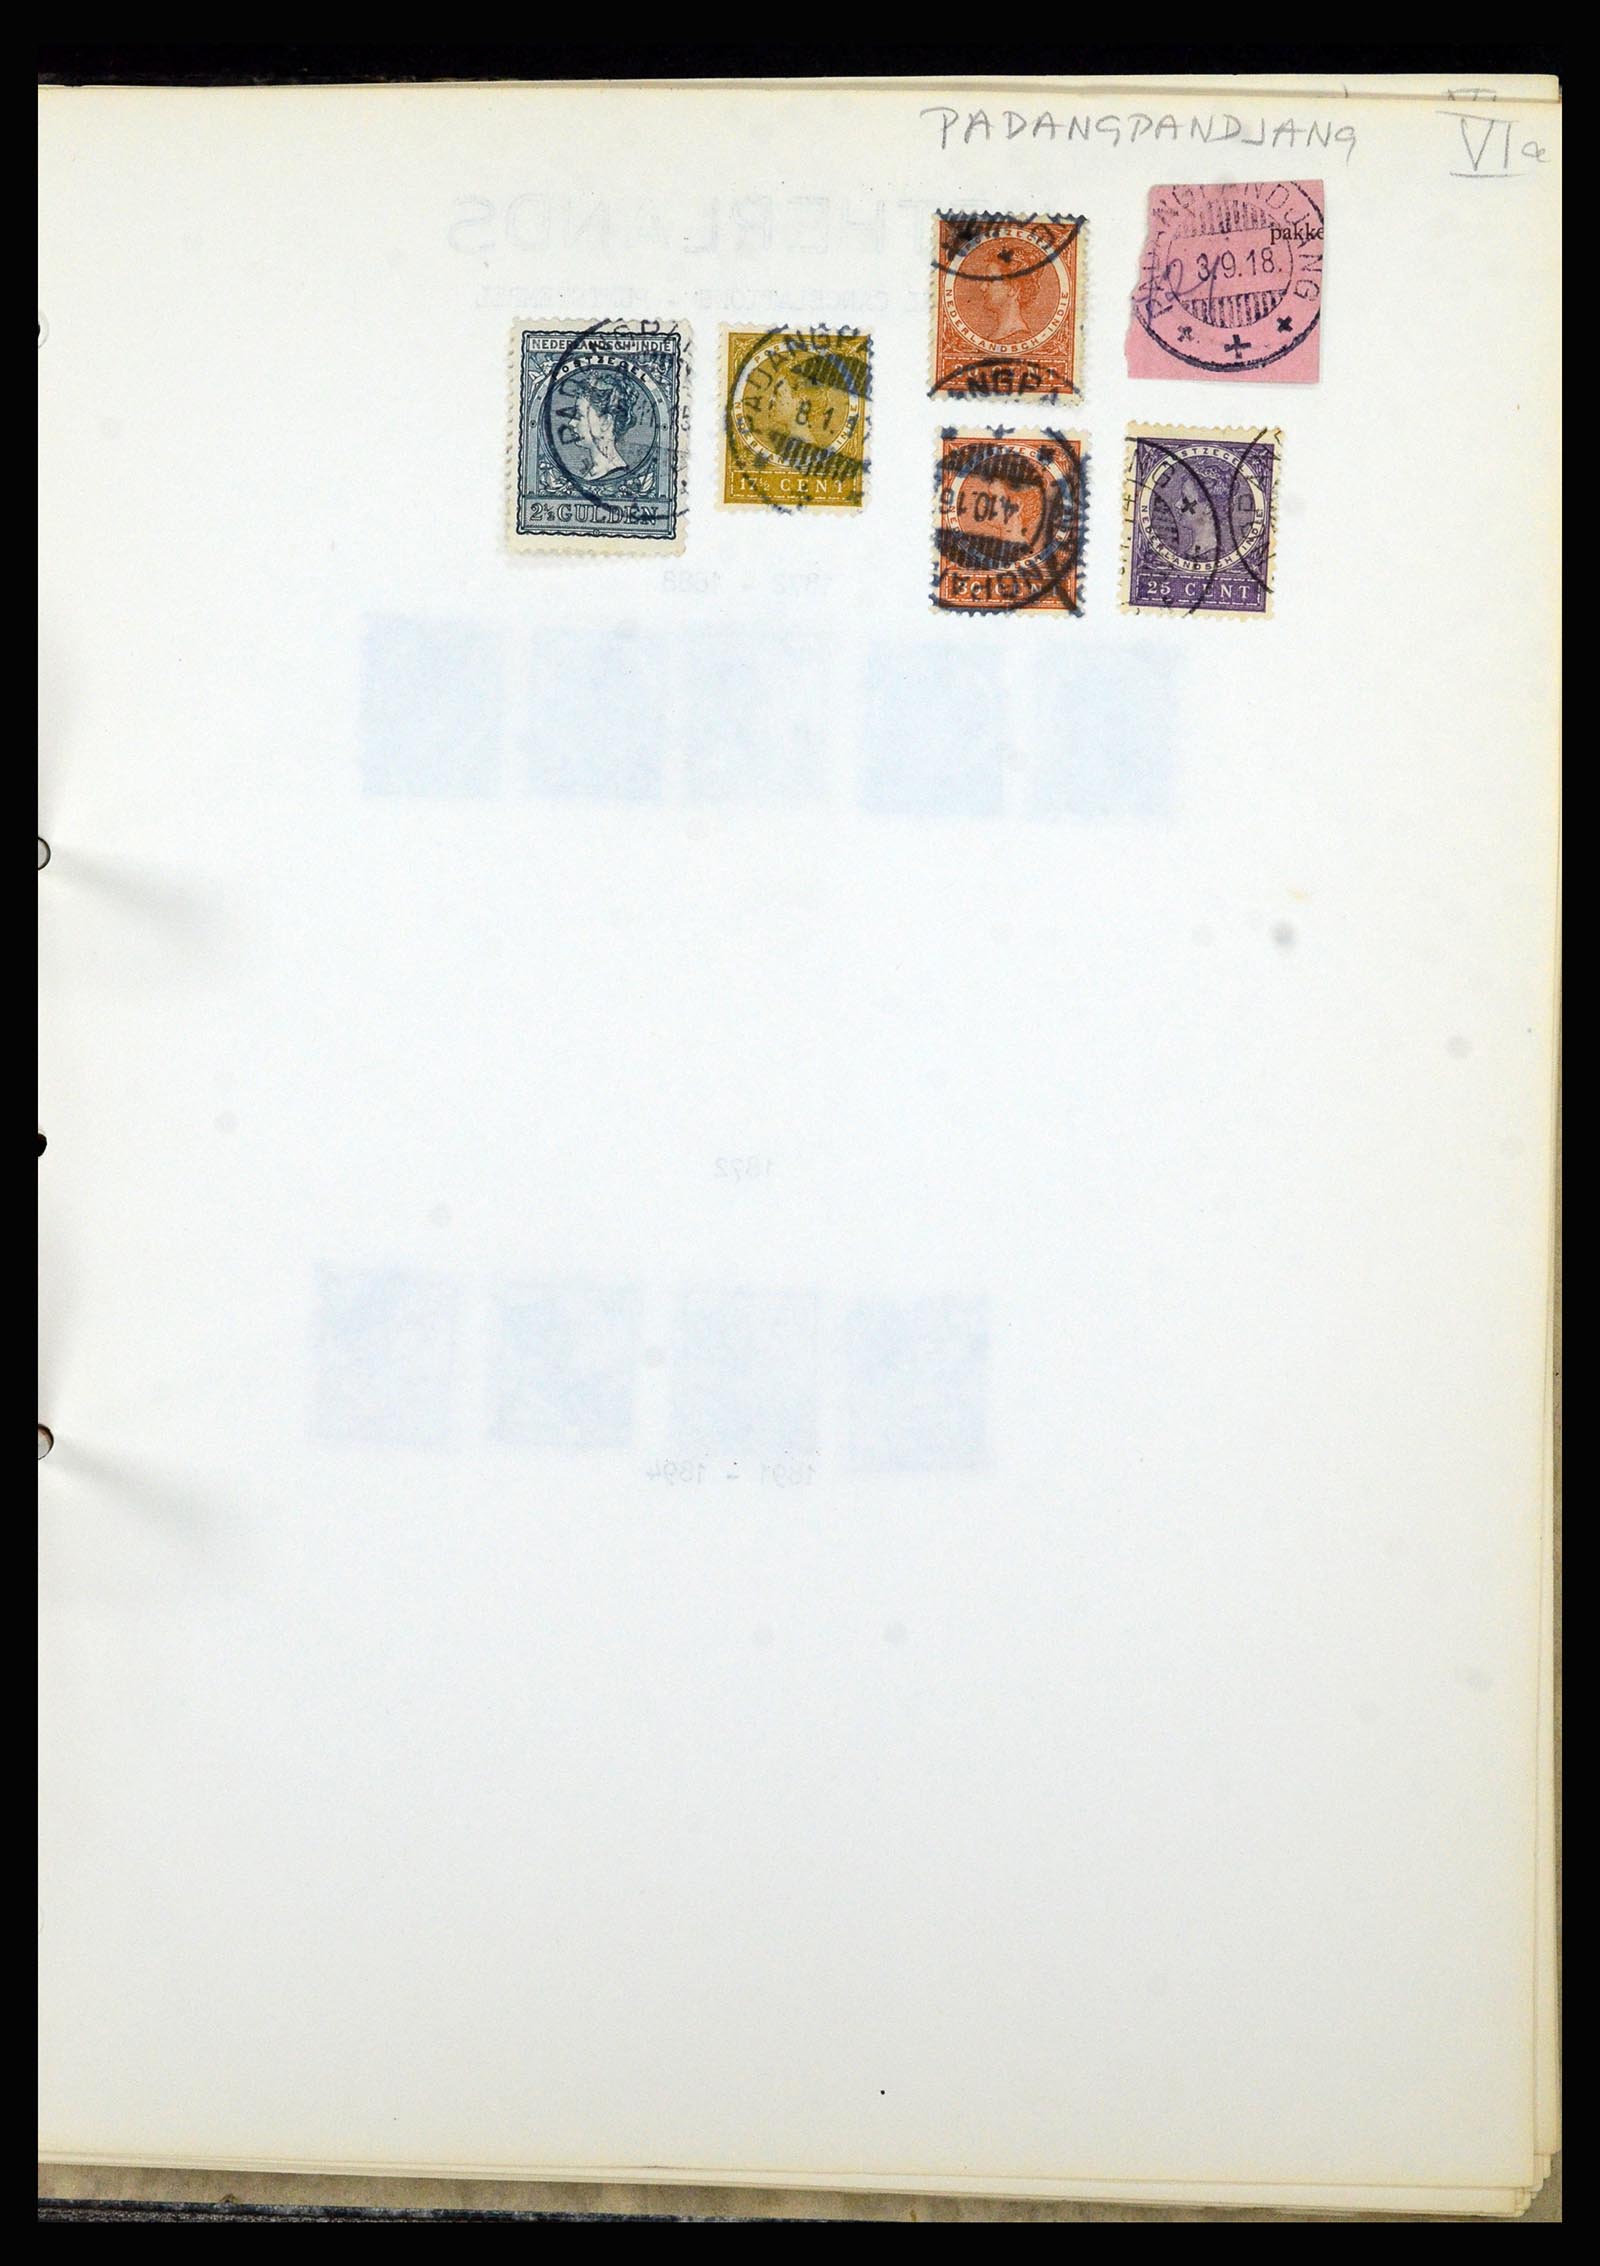 36841 080 - Stamp collection 36841 Dutch east Indies short bar cancels.